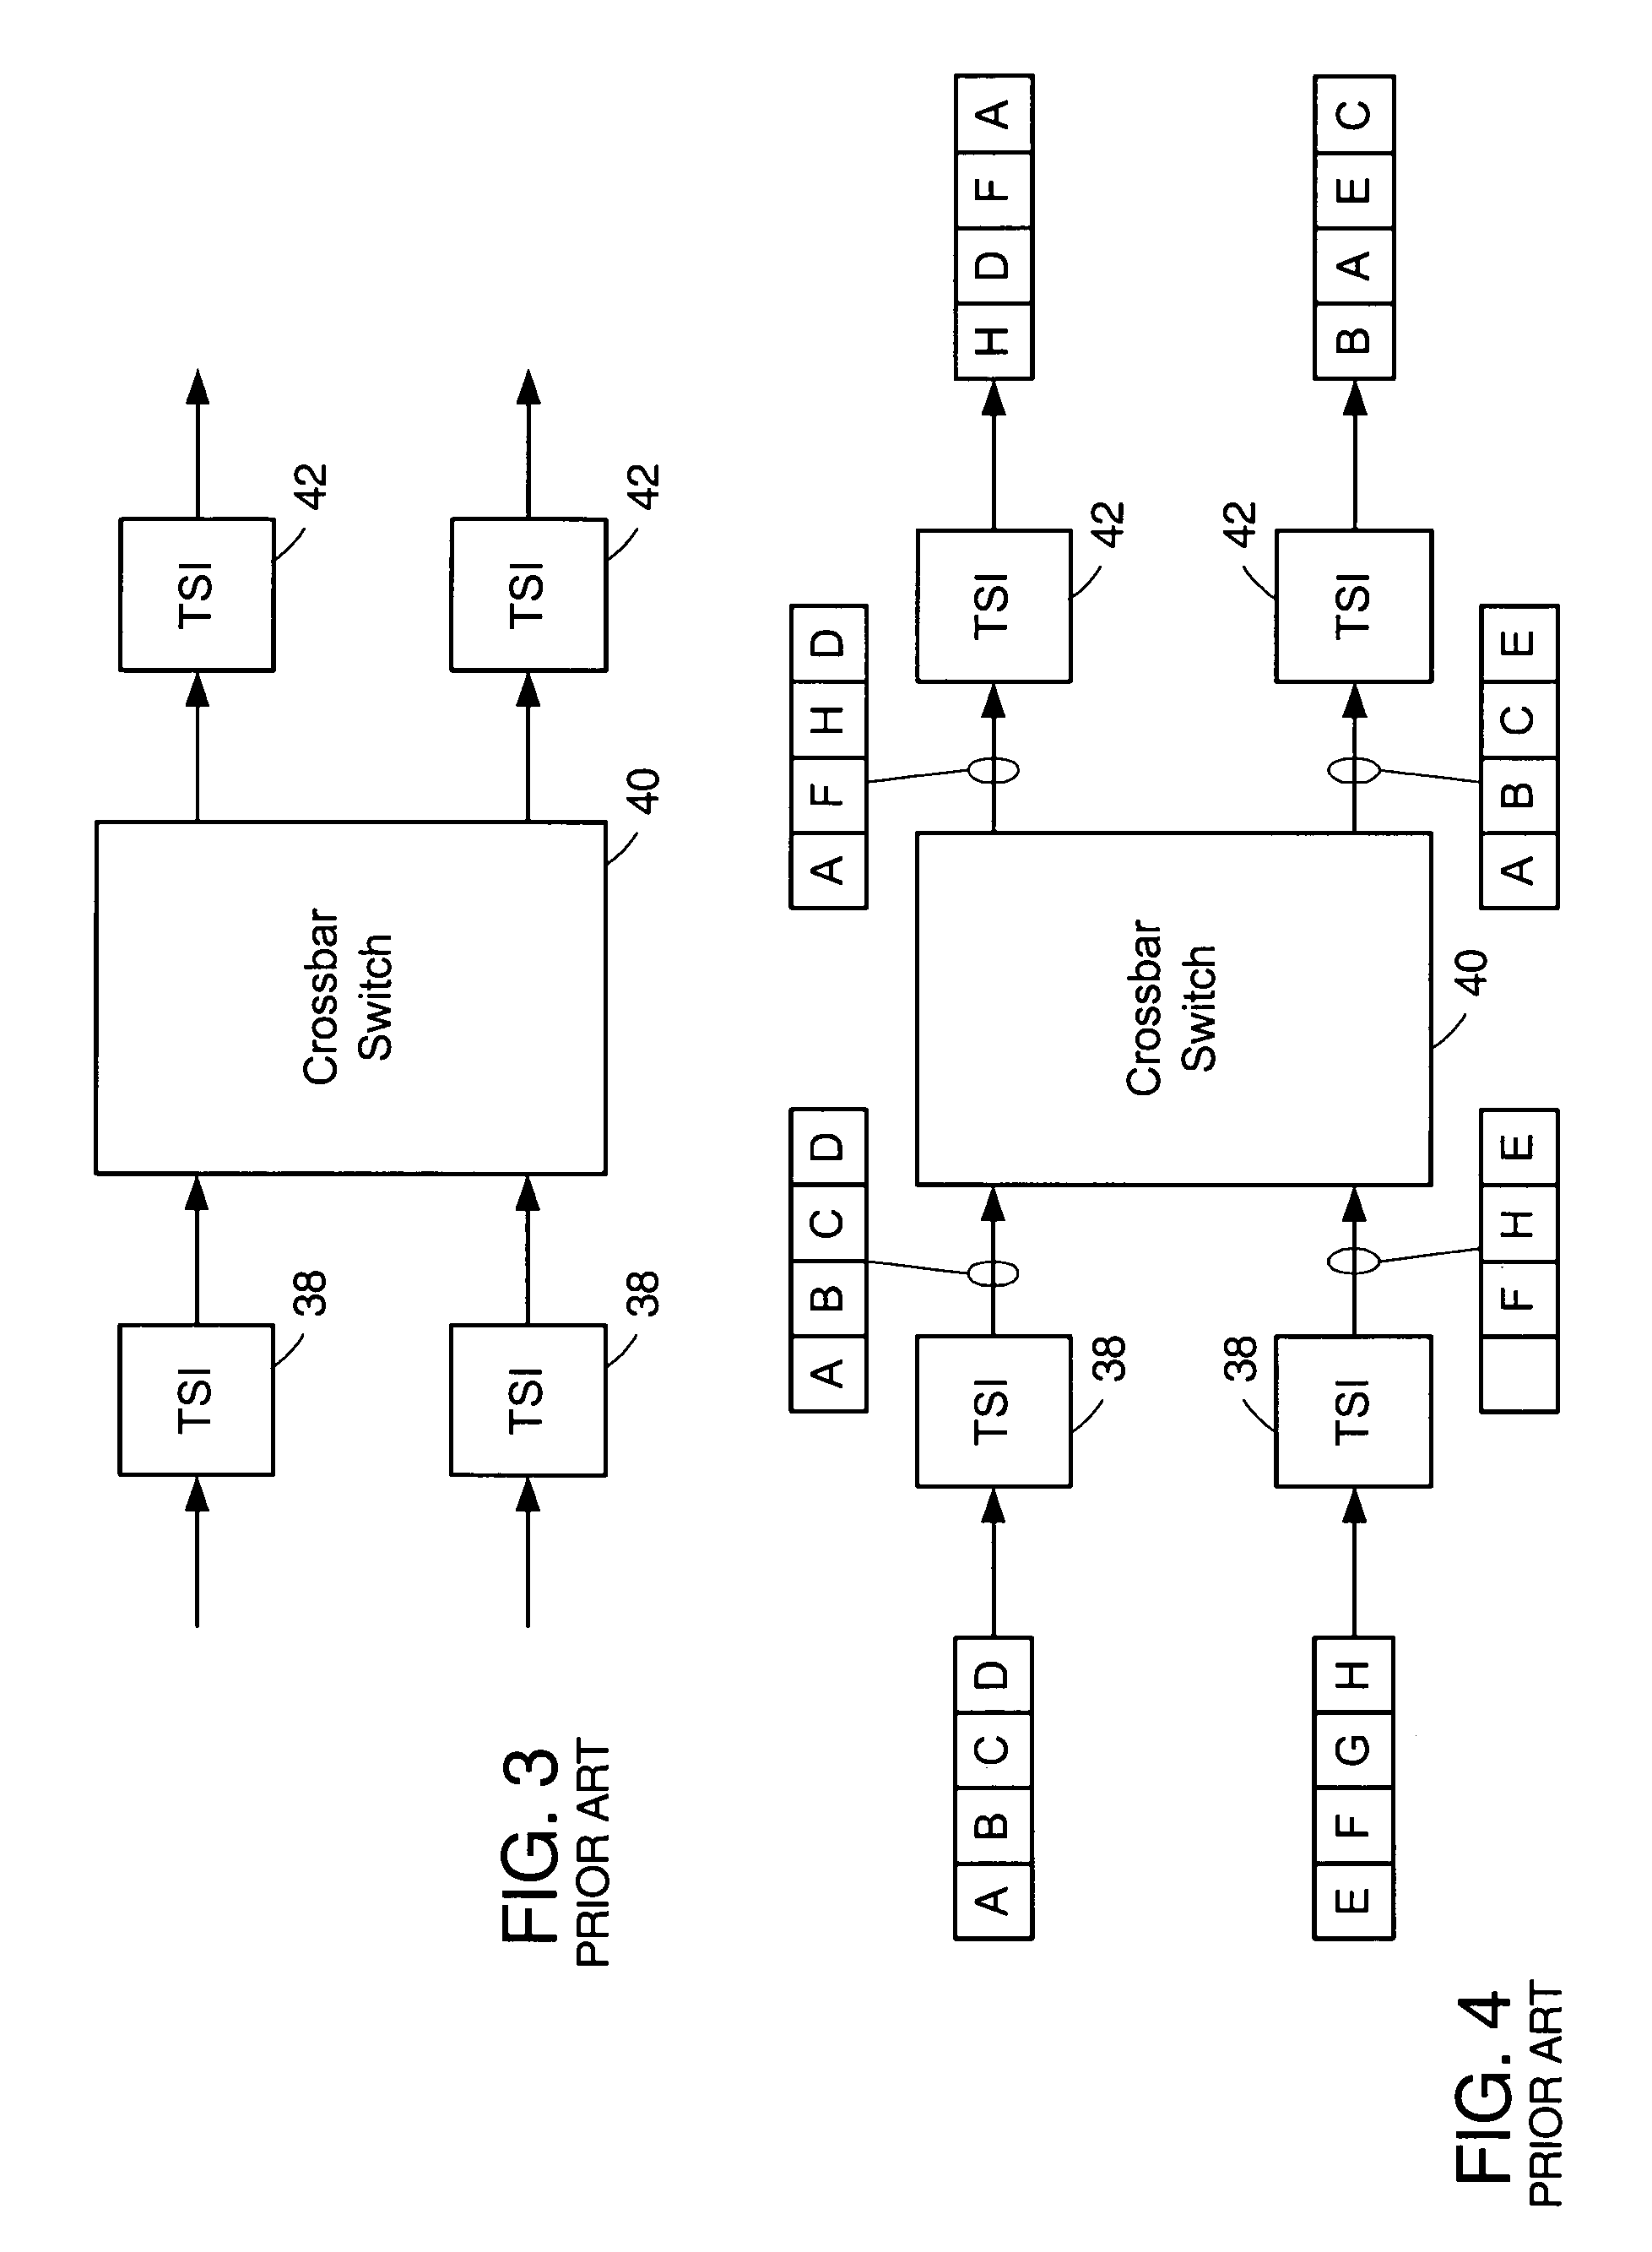 Multistage digital cross connect with synchronized configuration switching